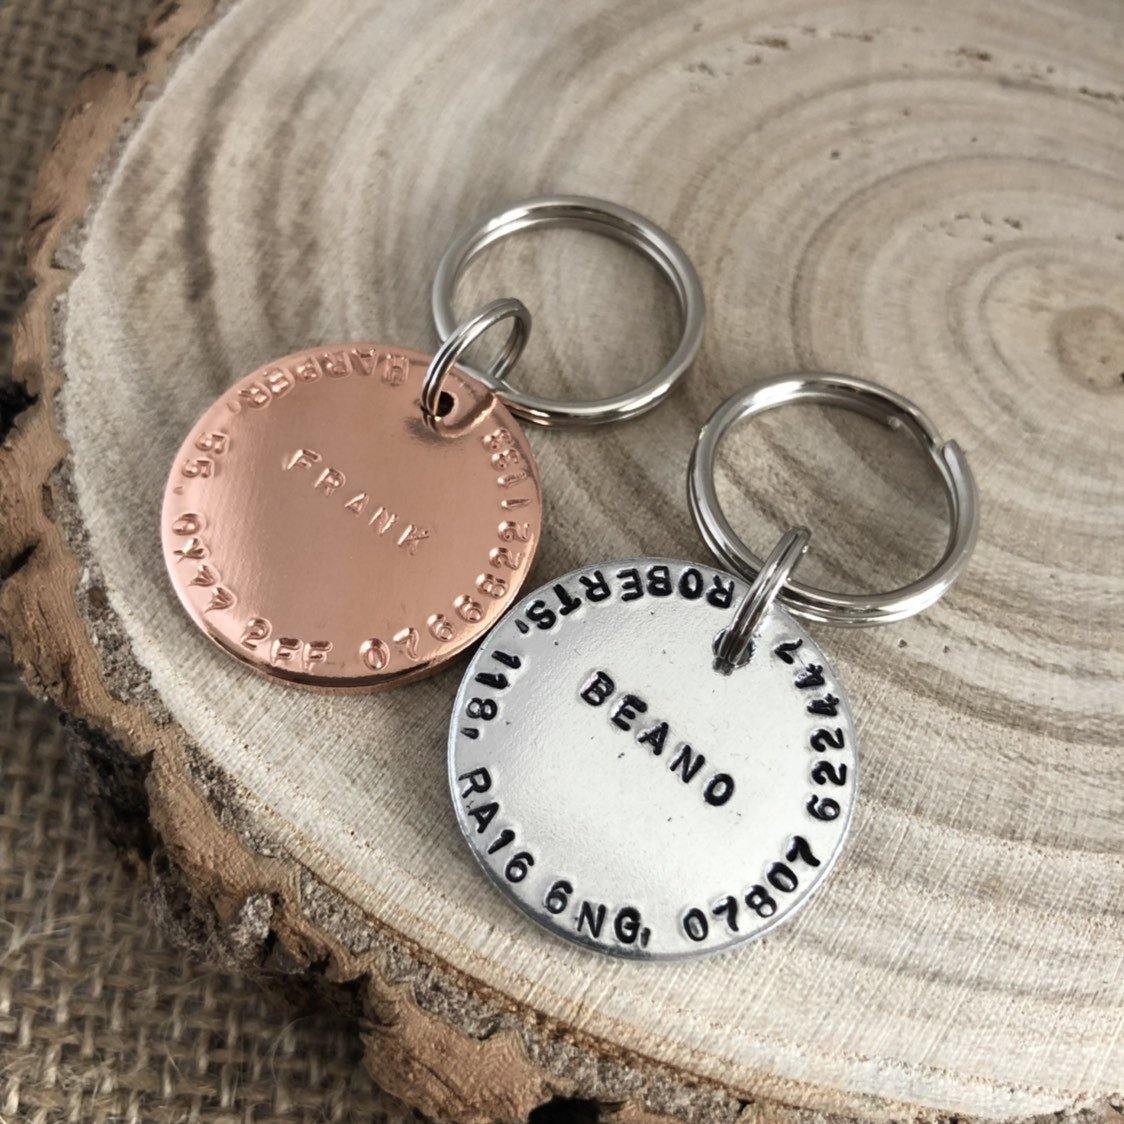 Dog Tag Personalised, Dog Tag for Dogs, Pet ID Tag, Copper or Aluminium - The Little Stamping Co.